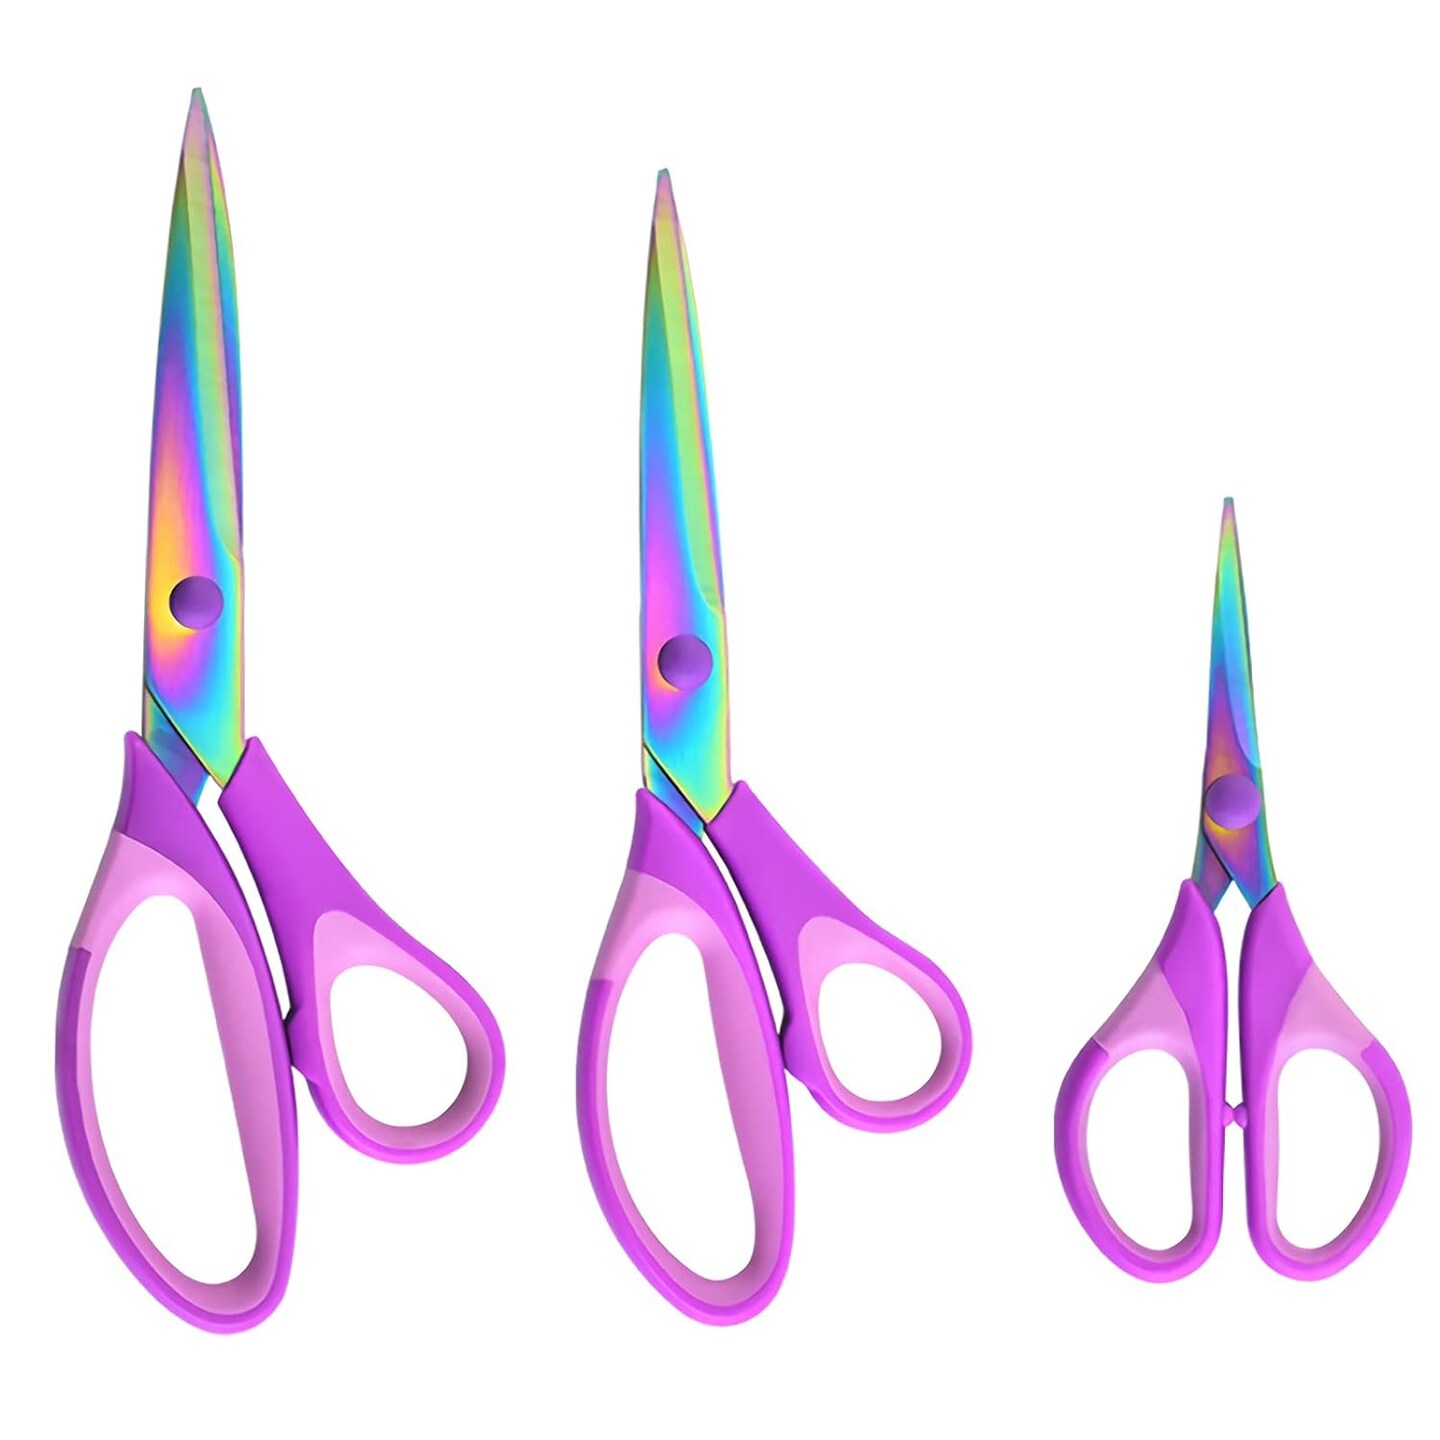 Craft Scissors Set of 3 Pack, All Purpose Sharp Titanium Blades Shears Rubber Soft Grip Handle, Multipurpose Fabric Scissors Tool Great for Adults, Office, Sewing, School and Home Supplies, Purple